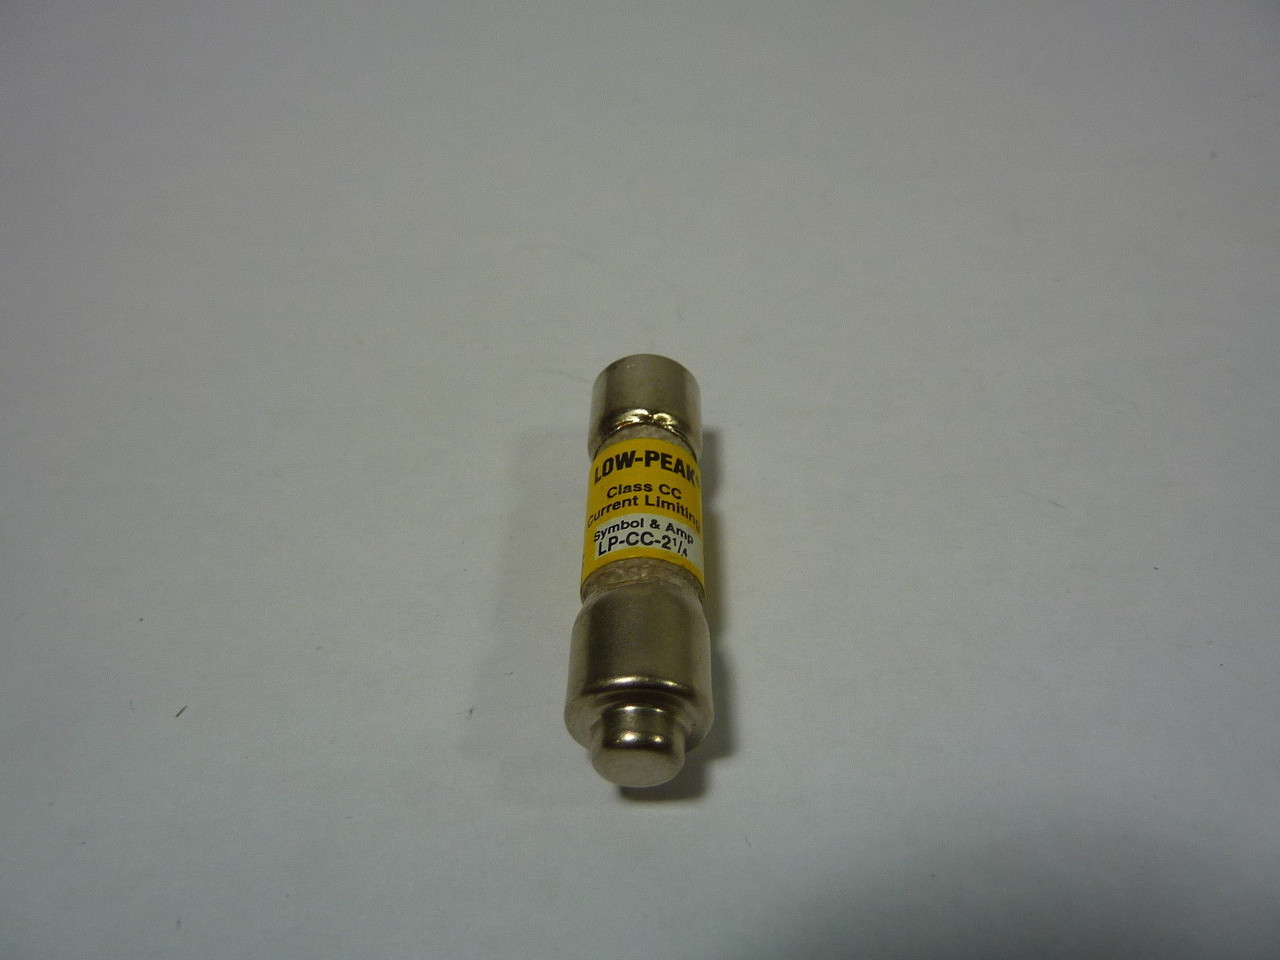 Low-Peak LP-CC-2-1/4 Time Delay Fuse 2-1/4A 600V USED